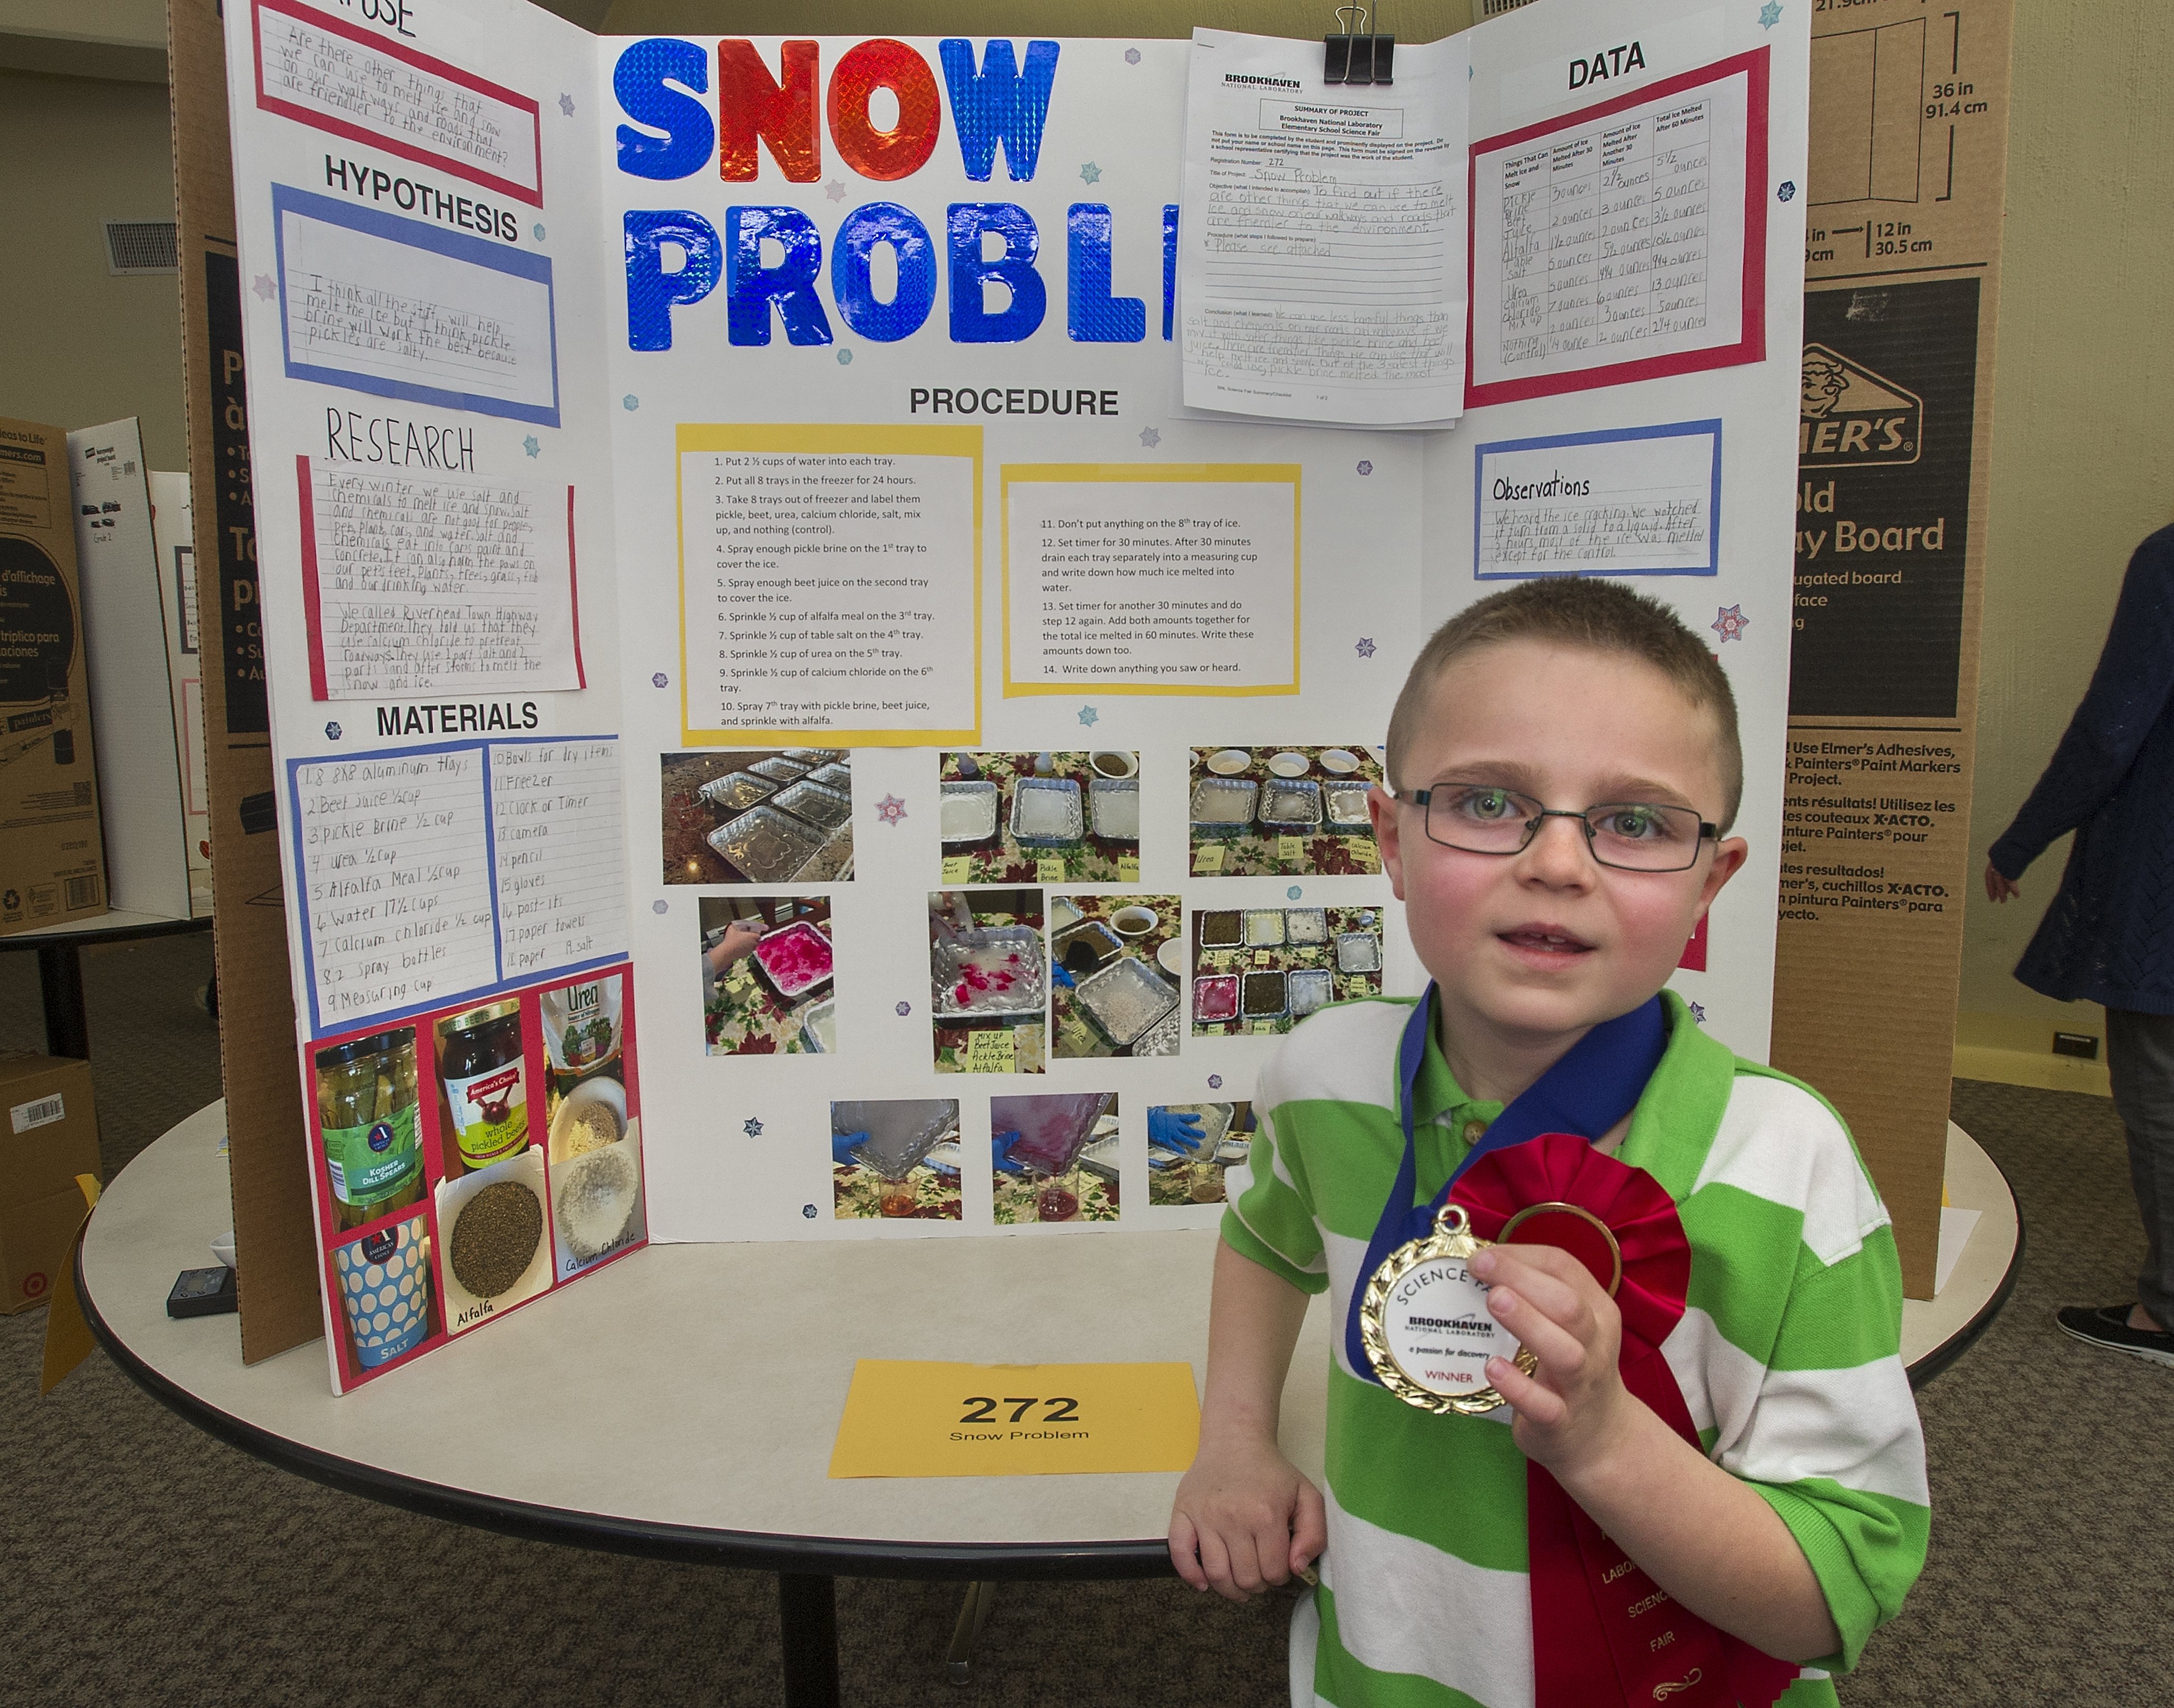 10 Attractive Science Fair Project Ideas For 4Th Grade second grade science fair project ideas homeshealth 37 2022